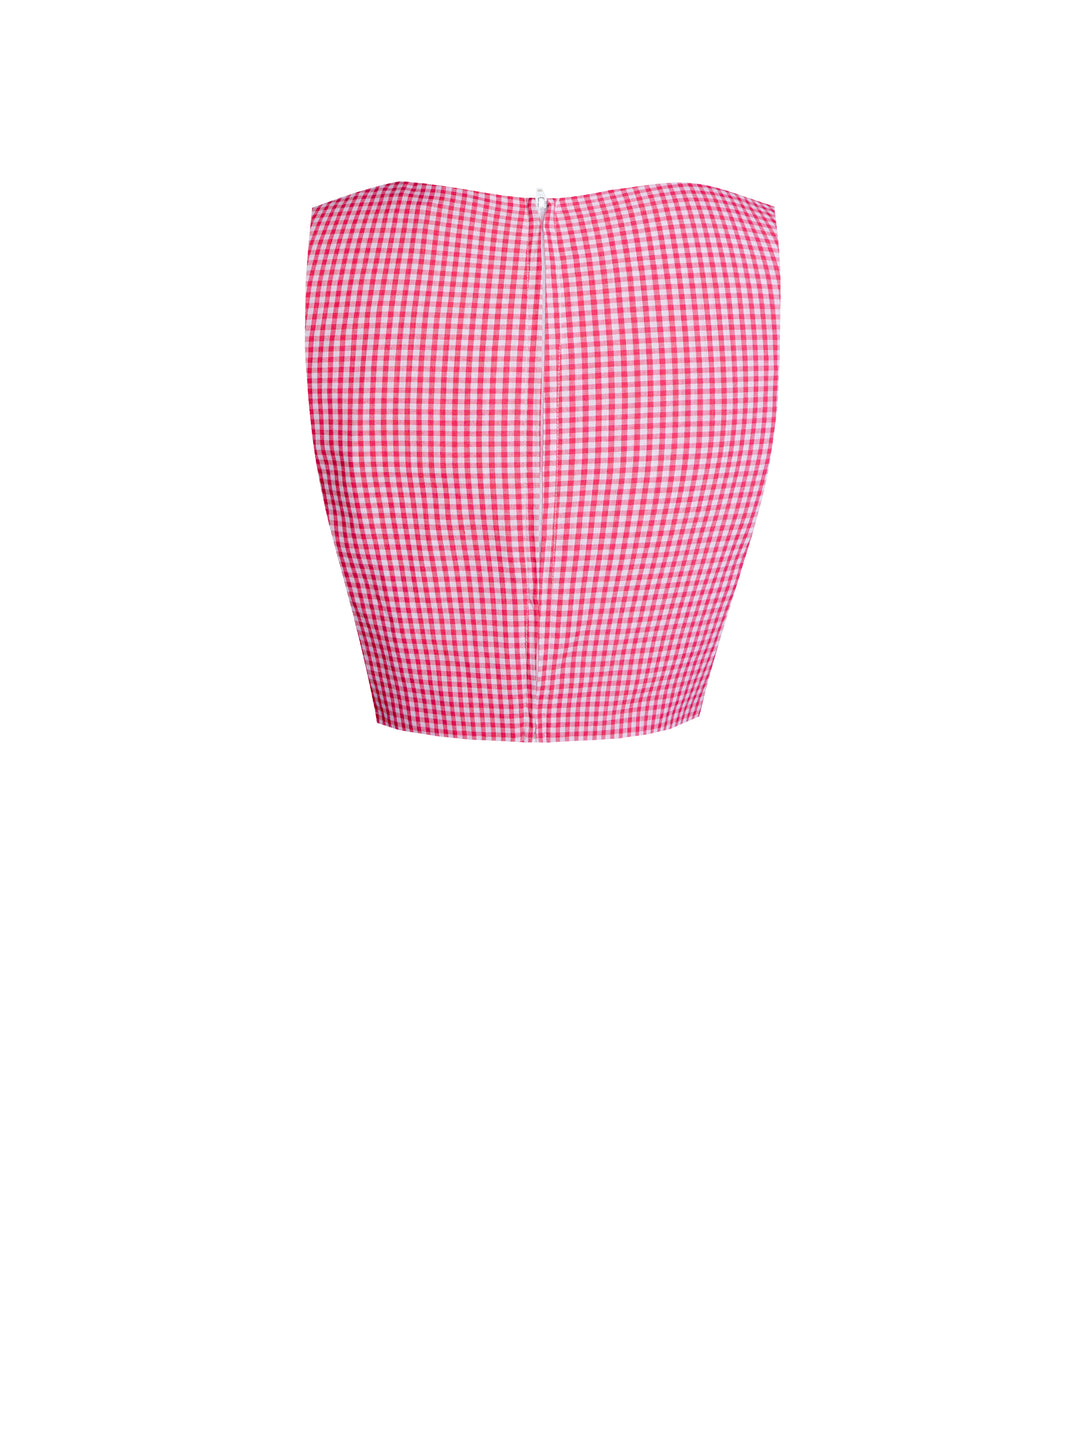 MTO - Georgia Top in Barbie Pink Gingham - Small Checks